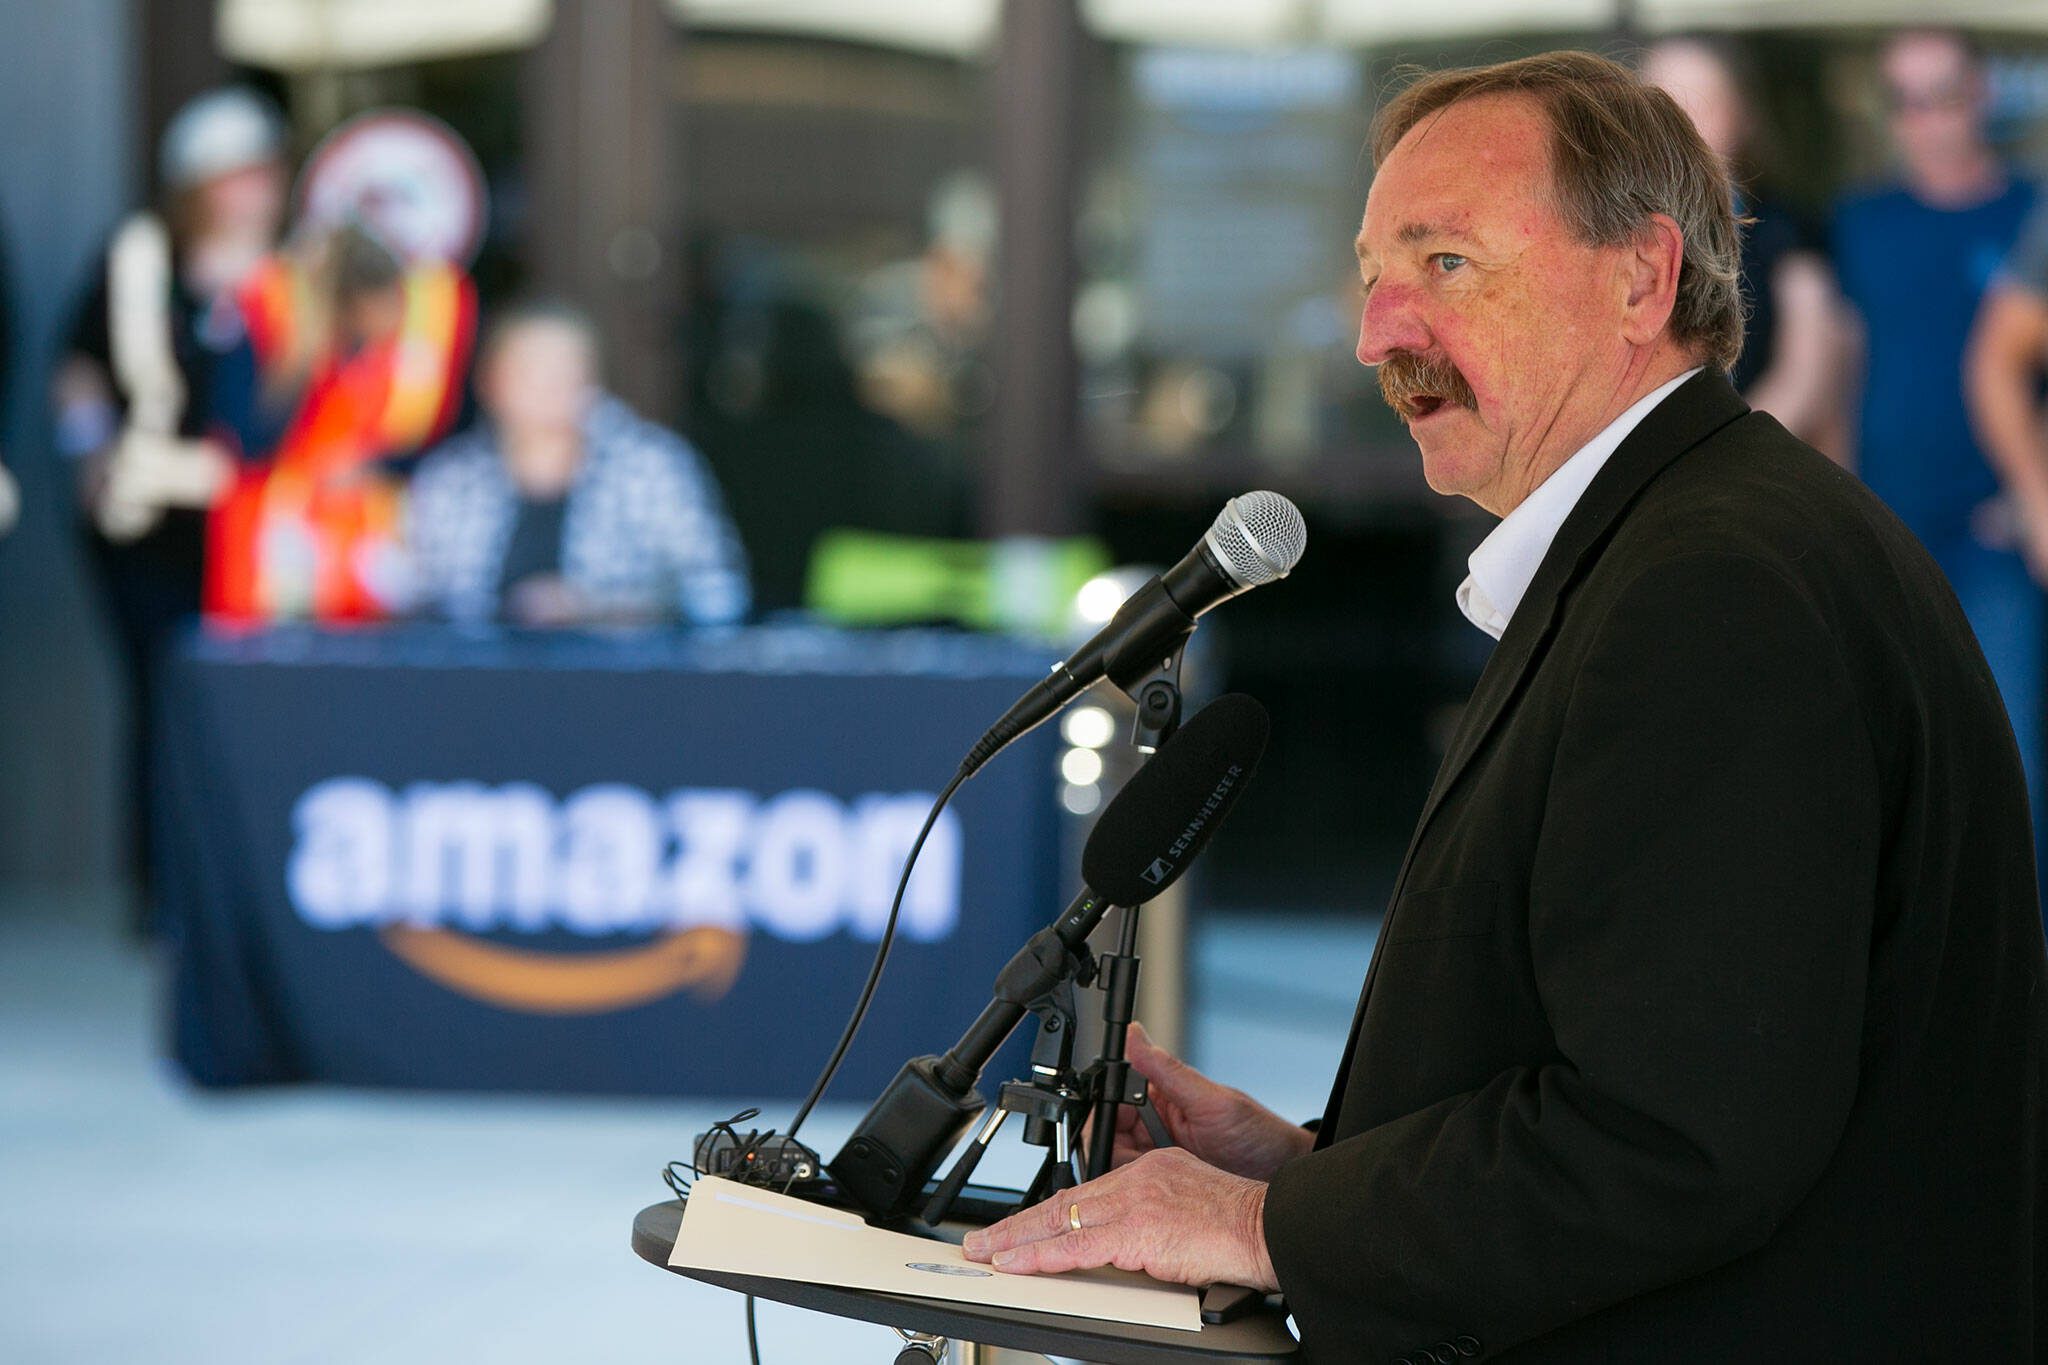 Snohomish County Executive Dave Somers speaks to the crowd during an opening ceremony at the new PAE2 Amazon Fulfillment Center on Thursday, Sept. 14, 2023, in Arlington, Washington. (Ryan Berry / The Herald)